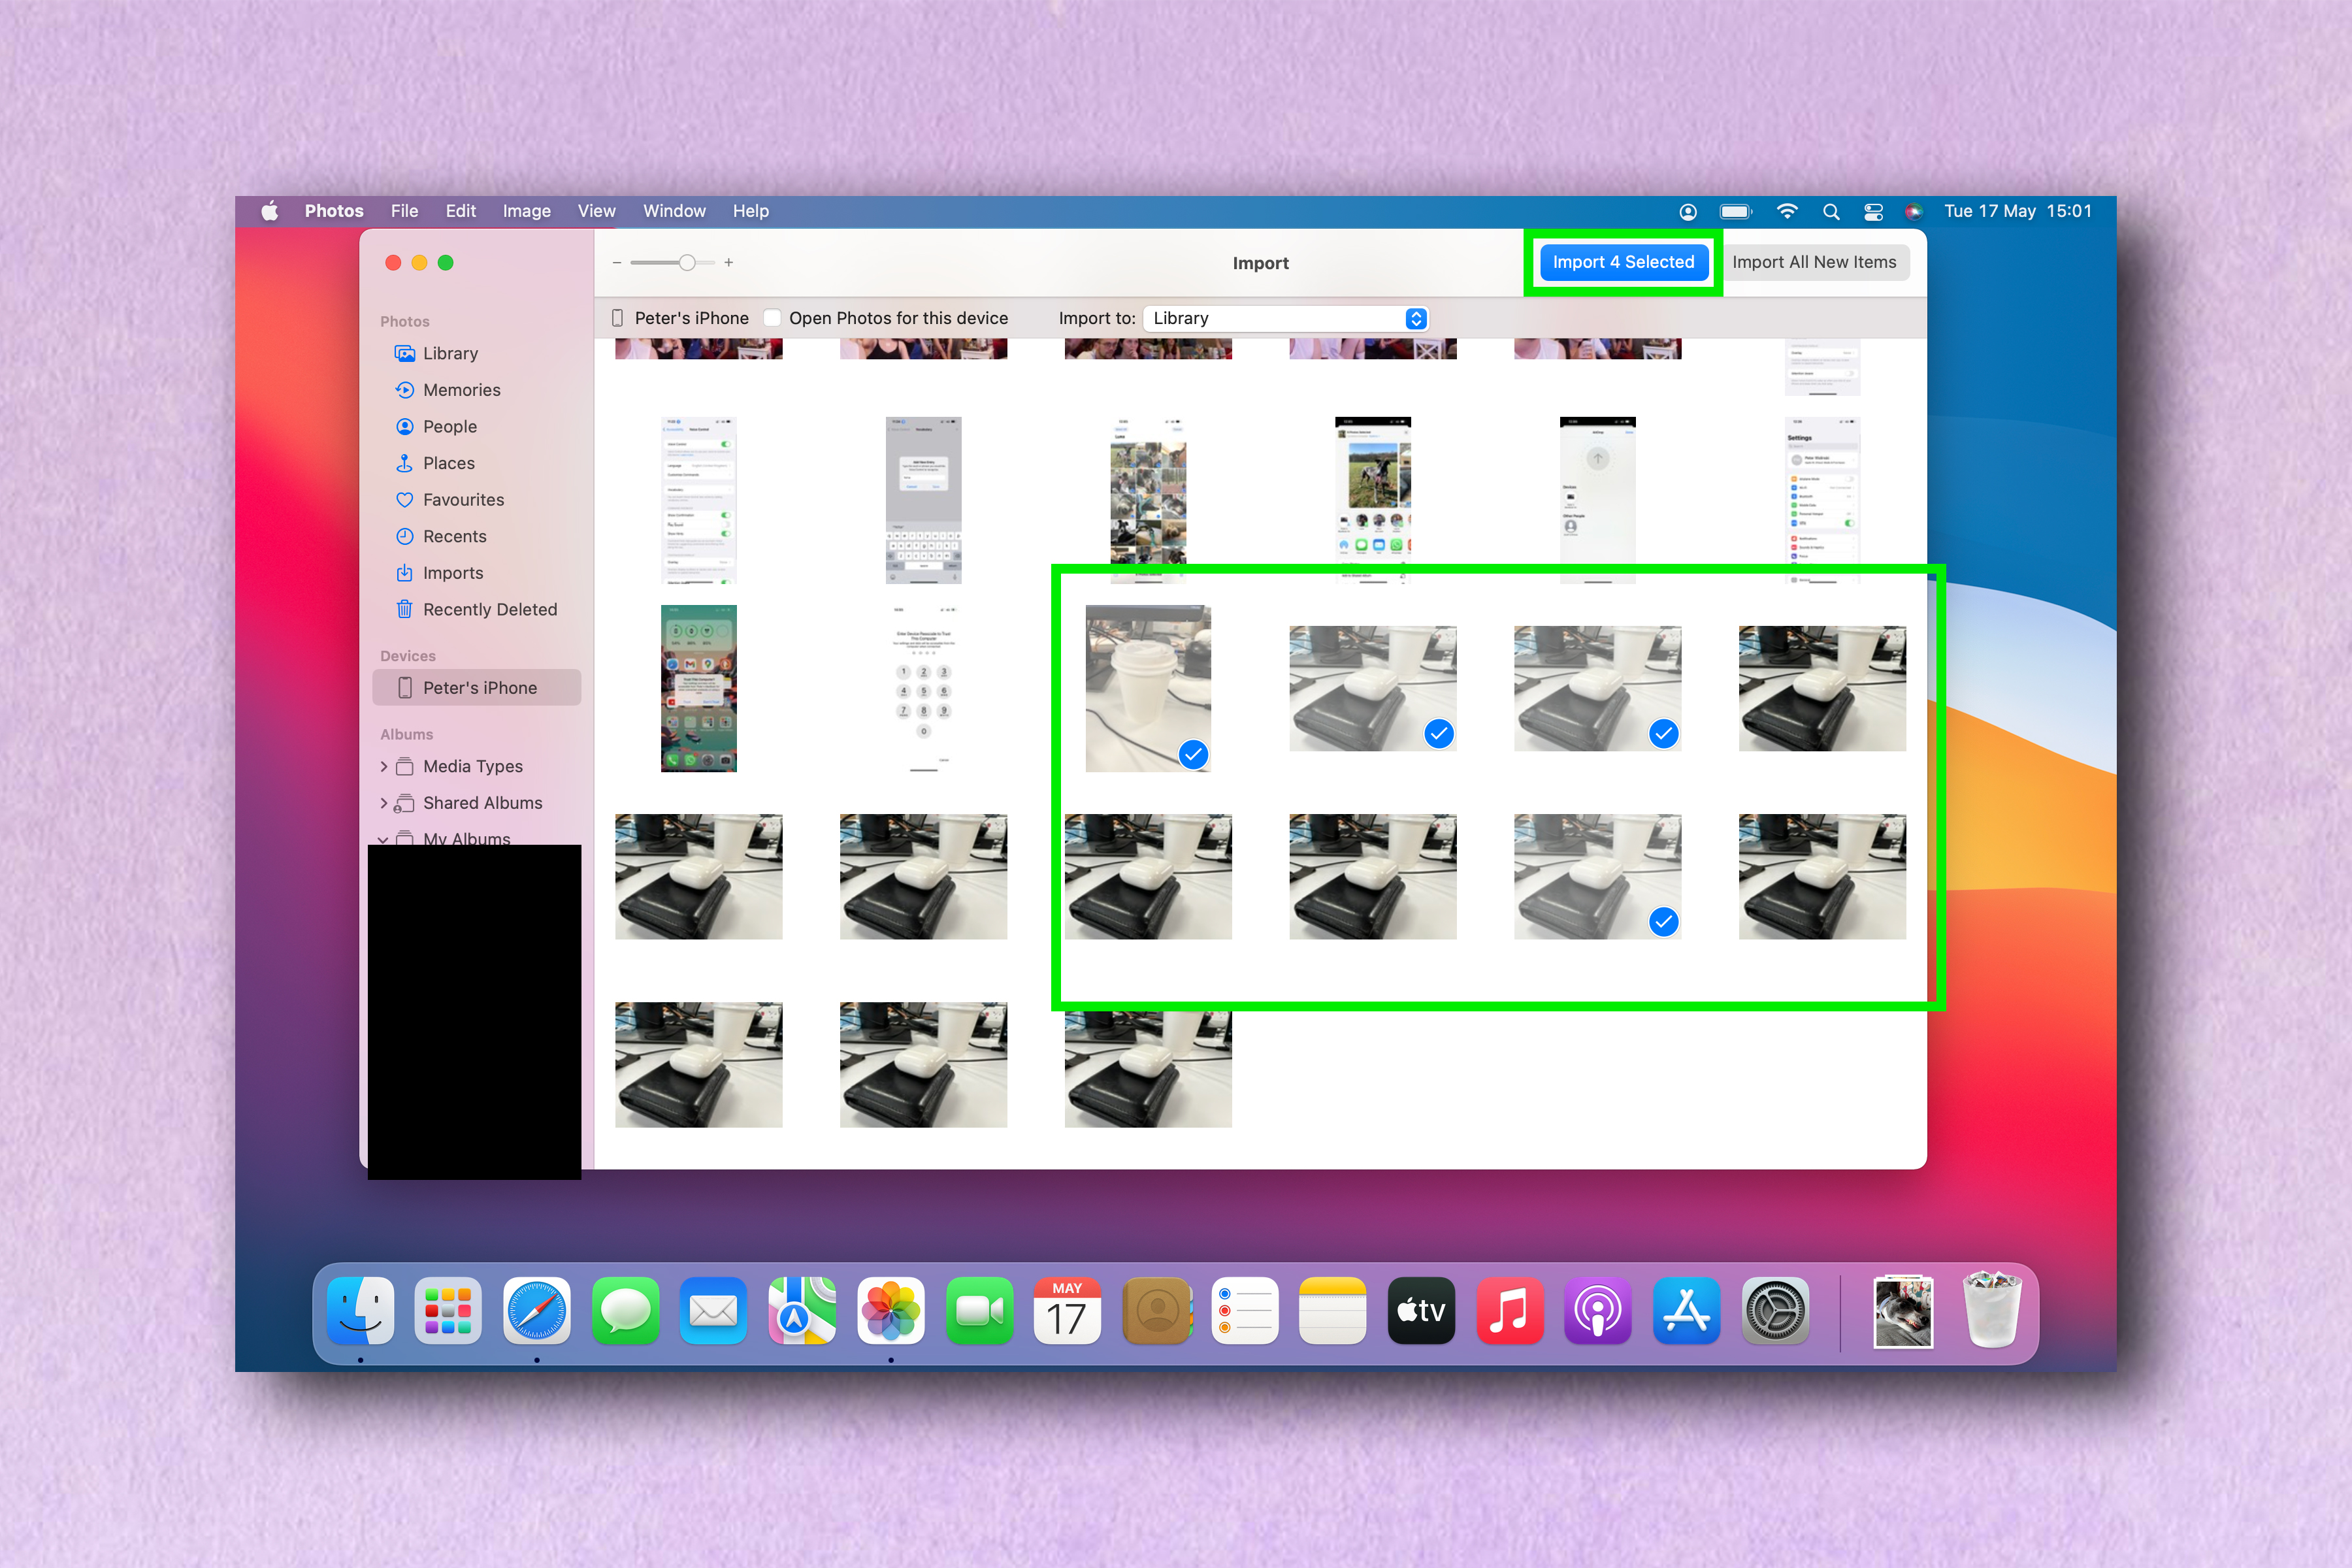 Screenshots showing how to transfer photos from iPhone to Mac